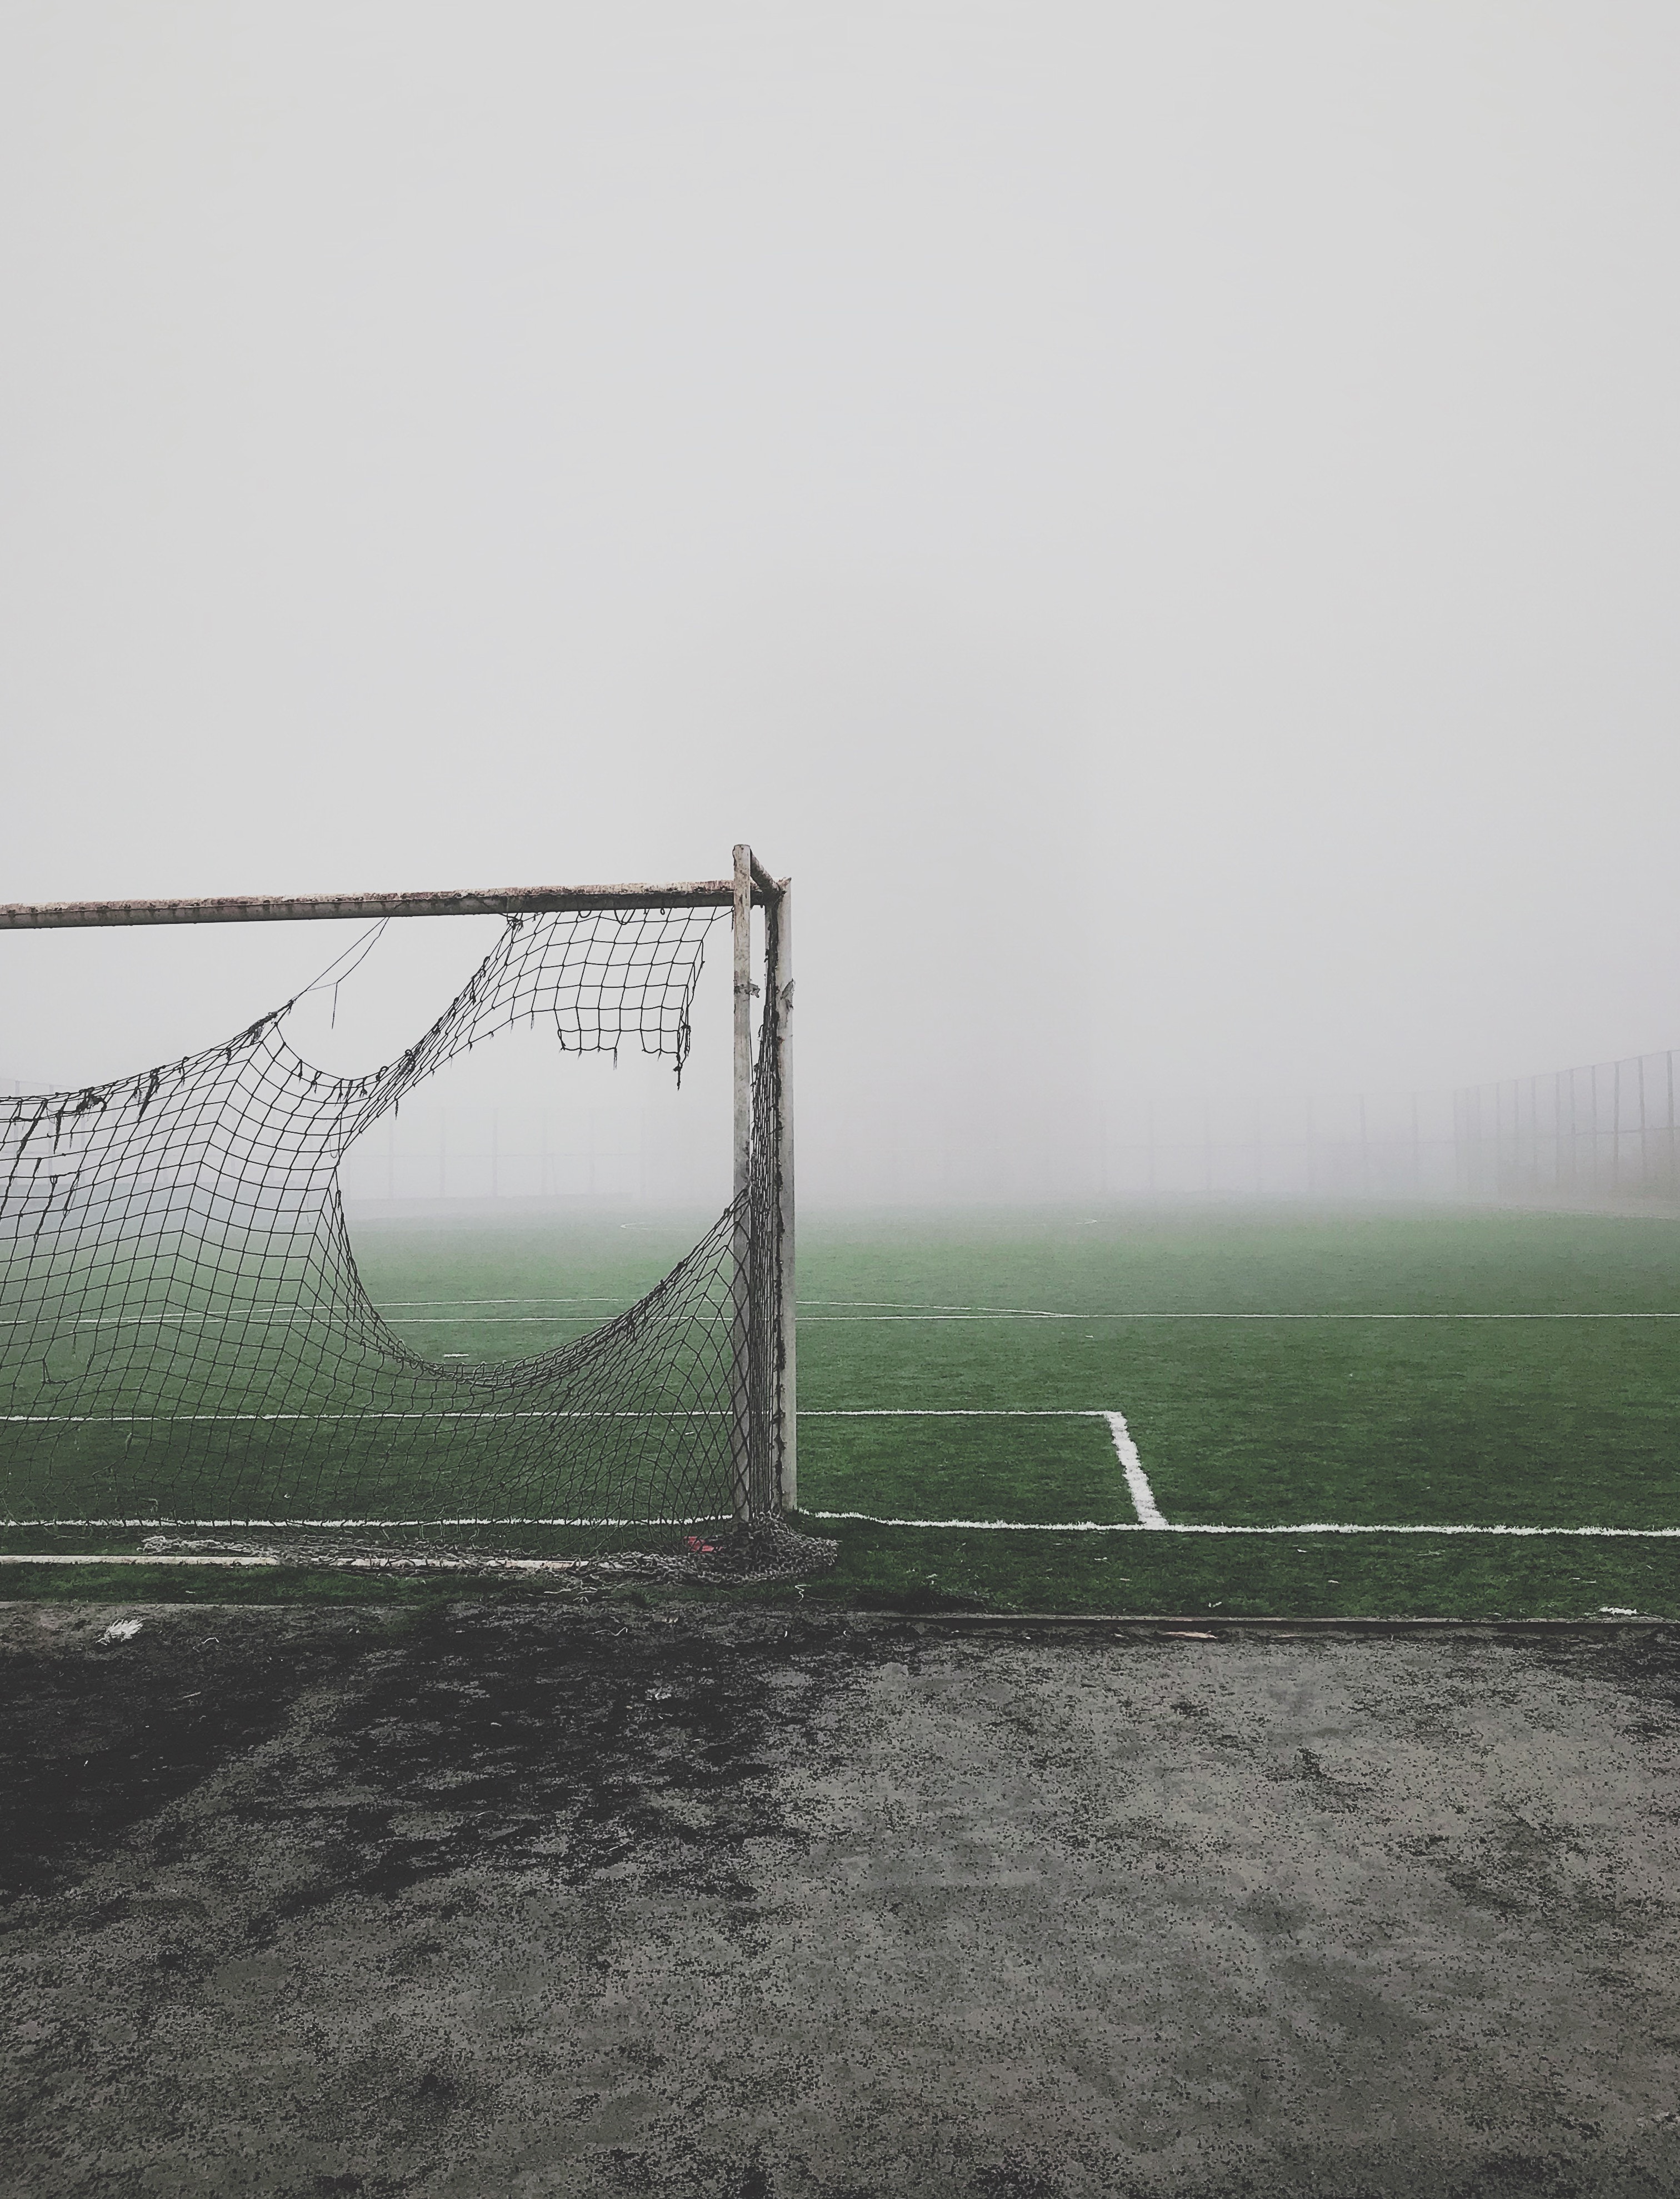 124026 download wallpaper sports, fog, lawn, gloomy, mood, ragged, football gate, football goal screensavers and pictures for free